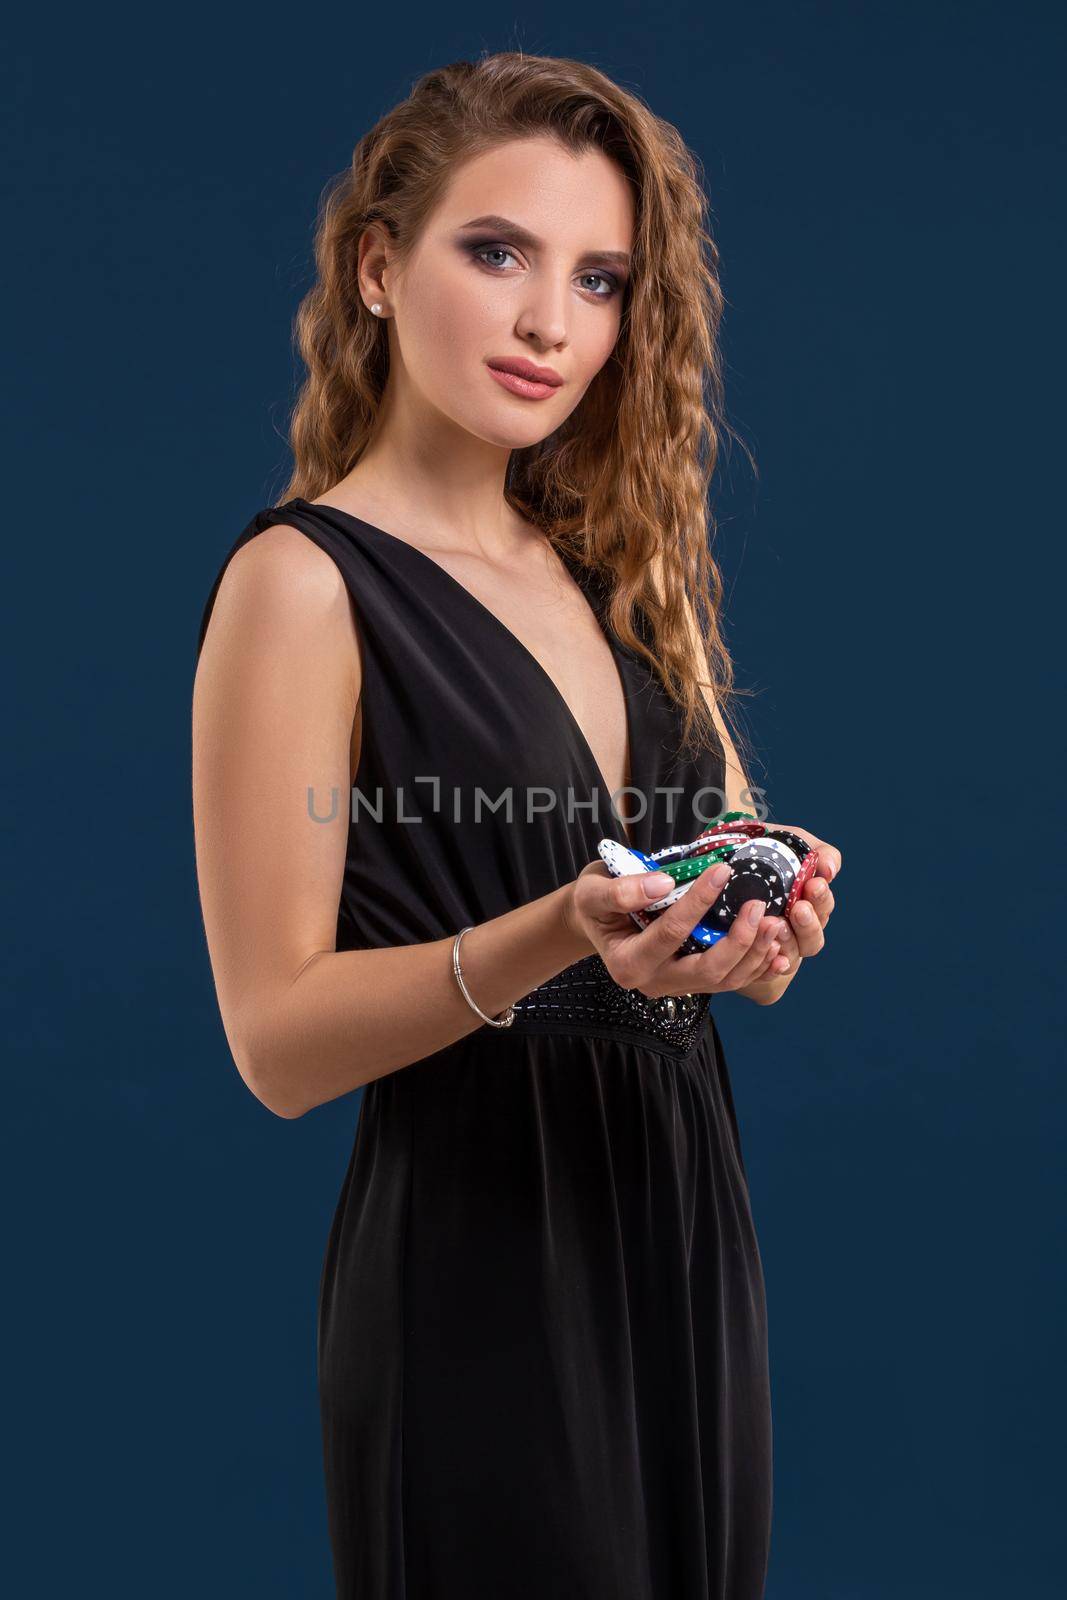 Elegant female casino player holding a handful of chips on dark blue background. A woman in a black dress with poker chips in her hands